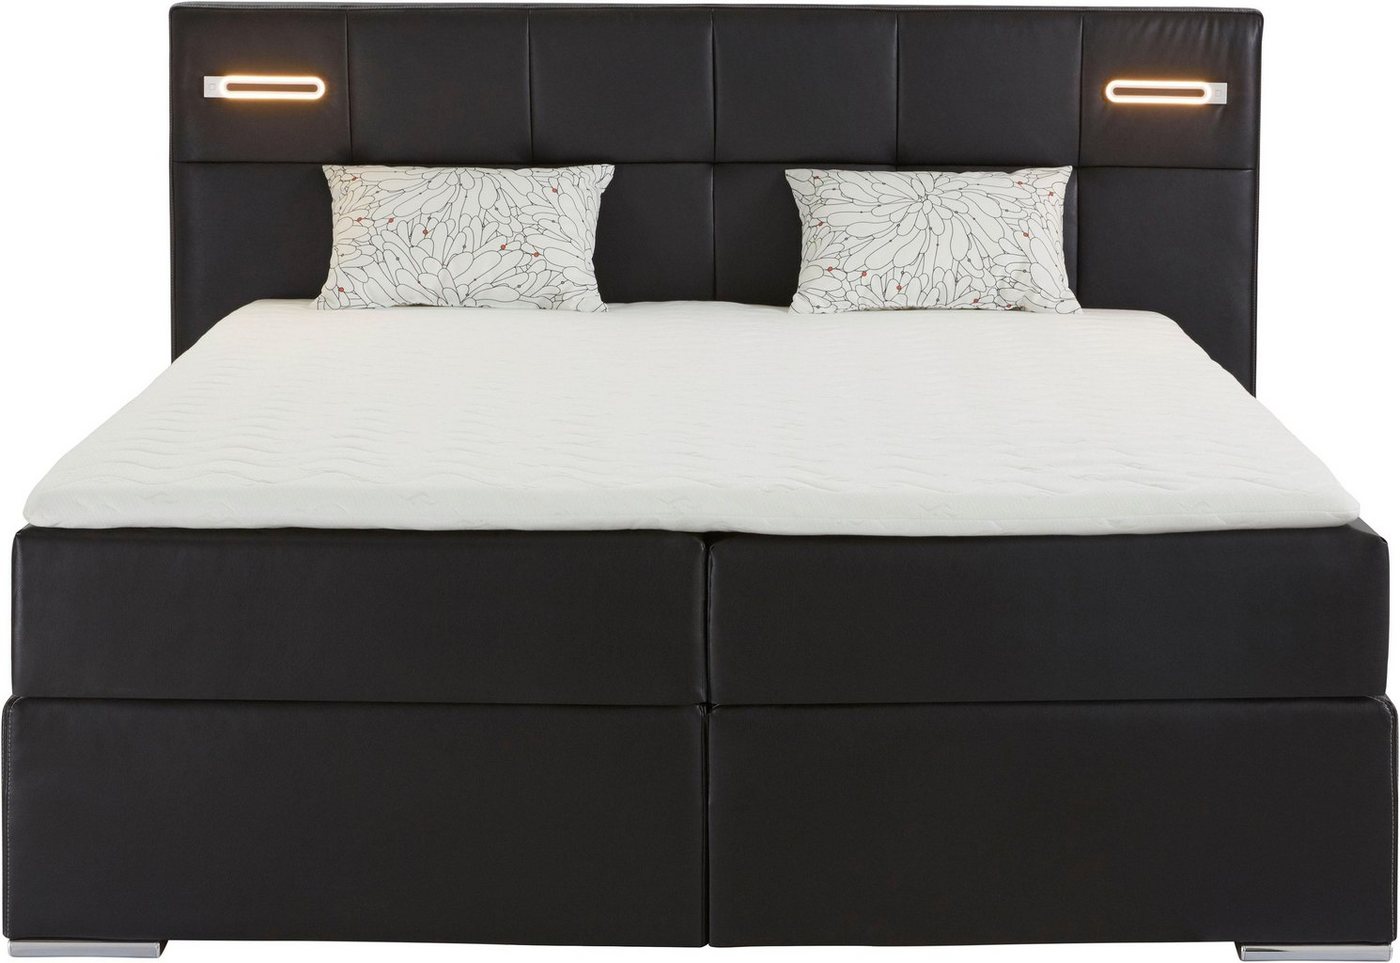 COLLECTION AB Boxspringbett »Dormante«, inkl. LED-Beleuchtung, Topper und Kissen-HomeTrends